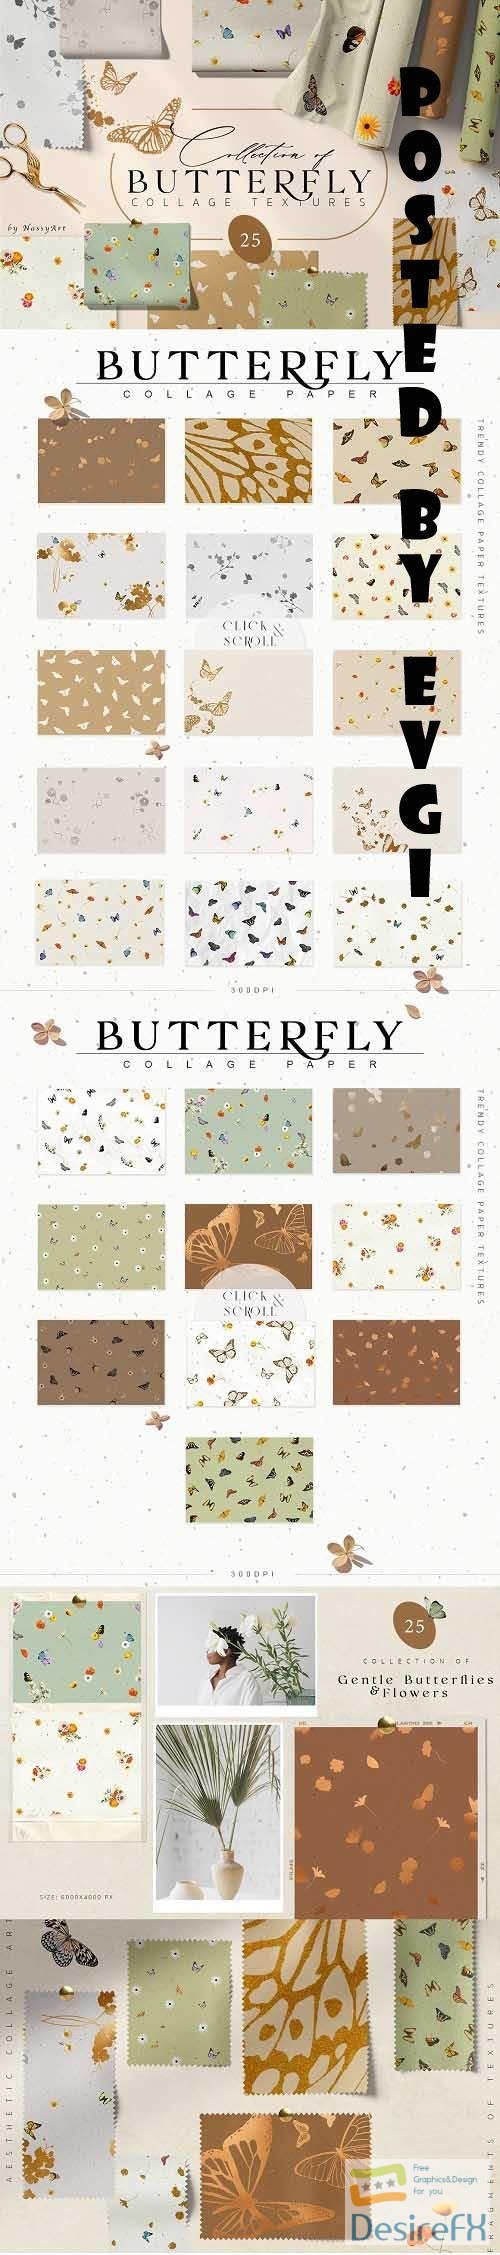 Butterfly Collage Paper Textures - 6685410